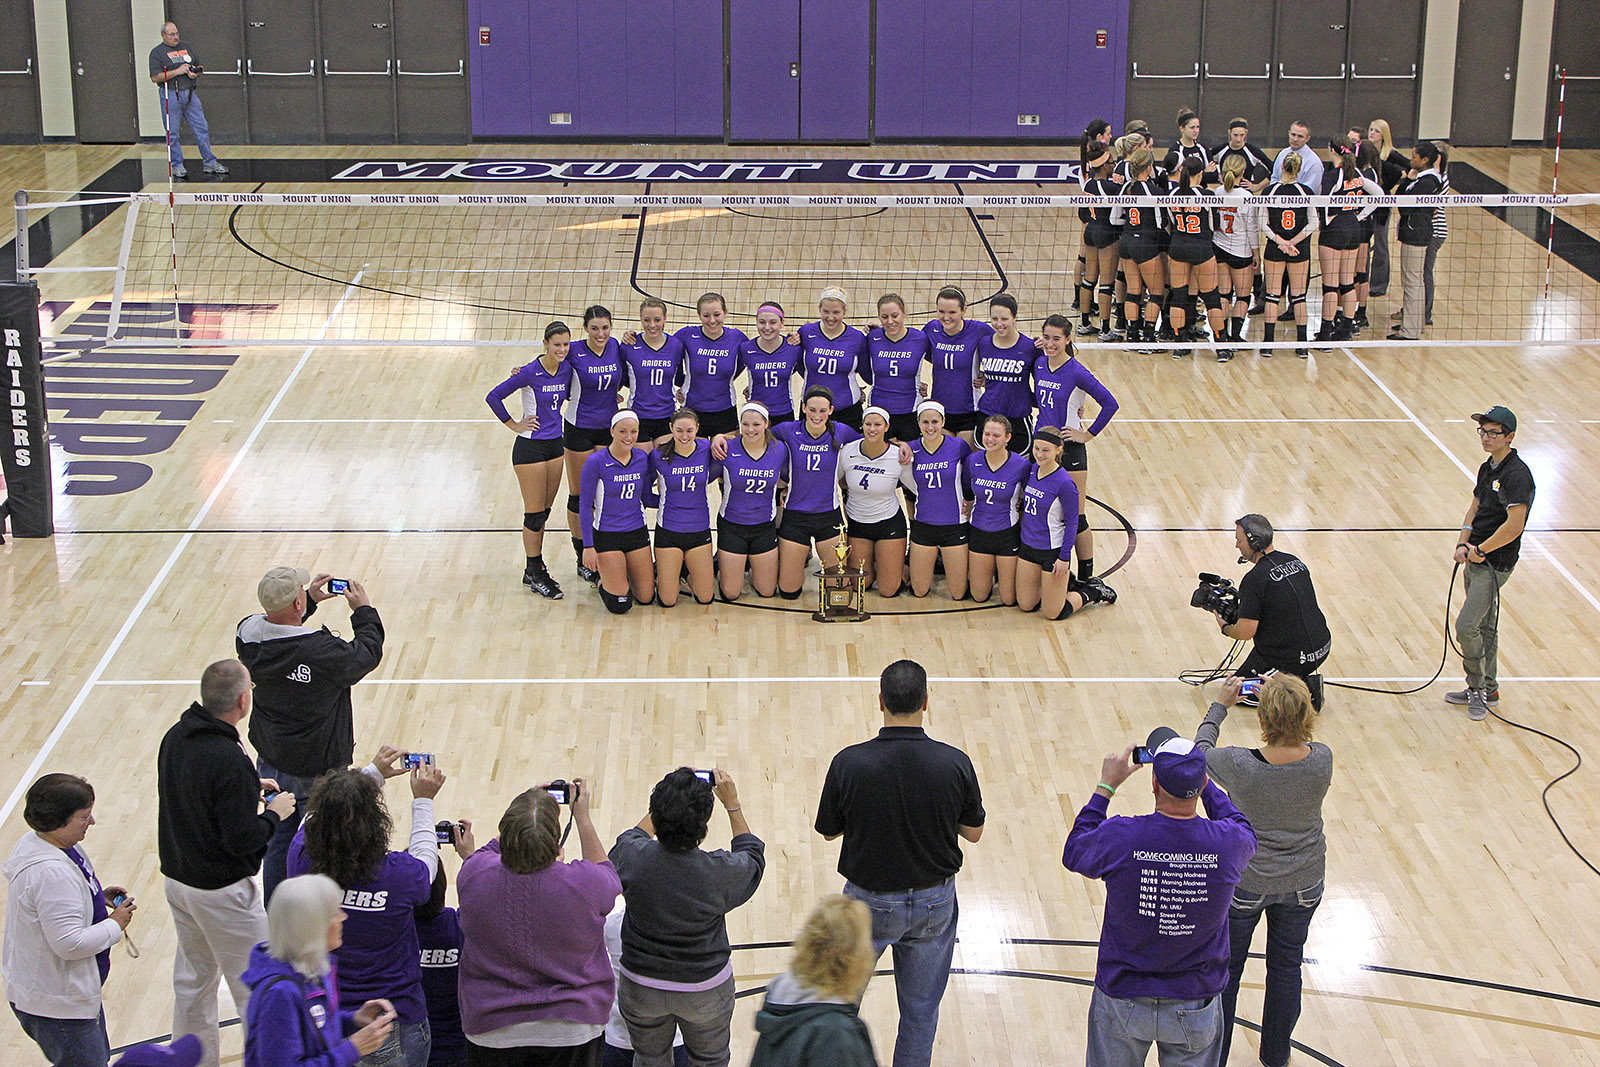 Coverage of the LIVE stream of the Women's OAC volleyball finals at Mount Union College.